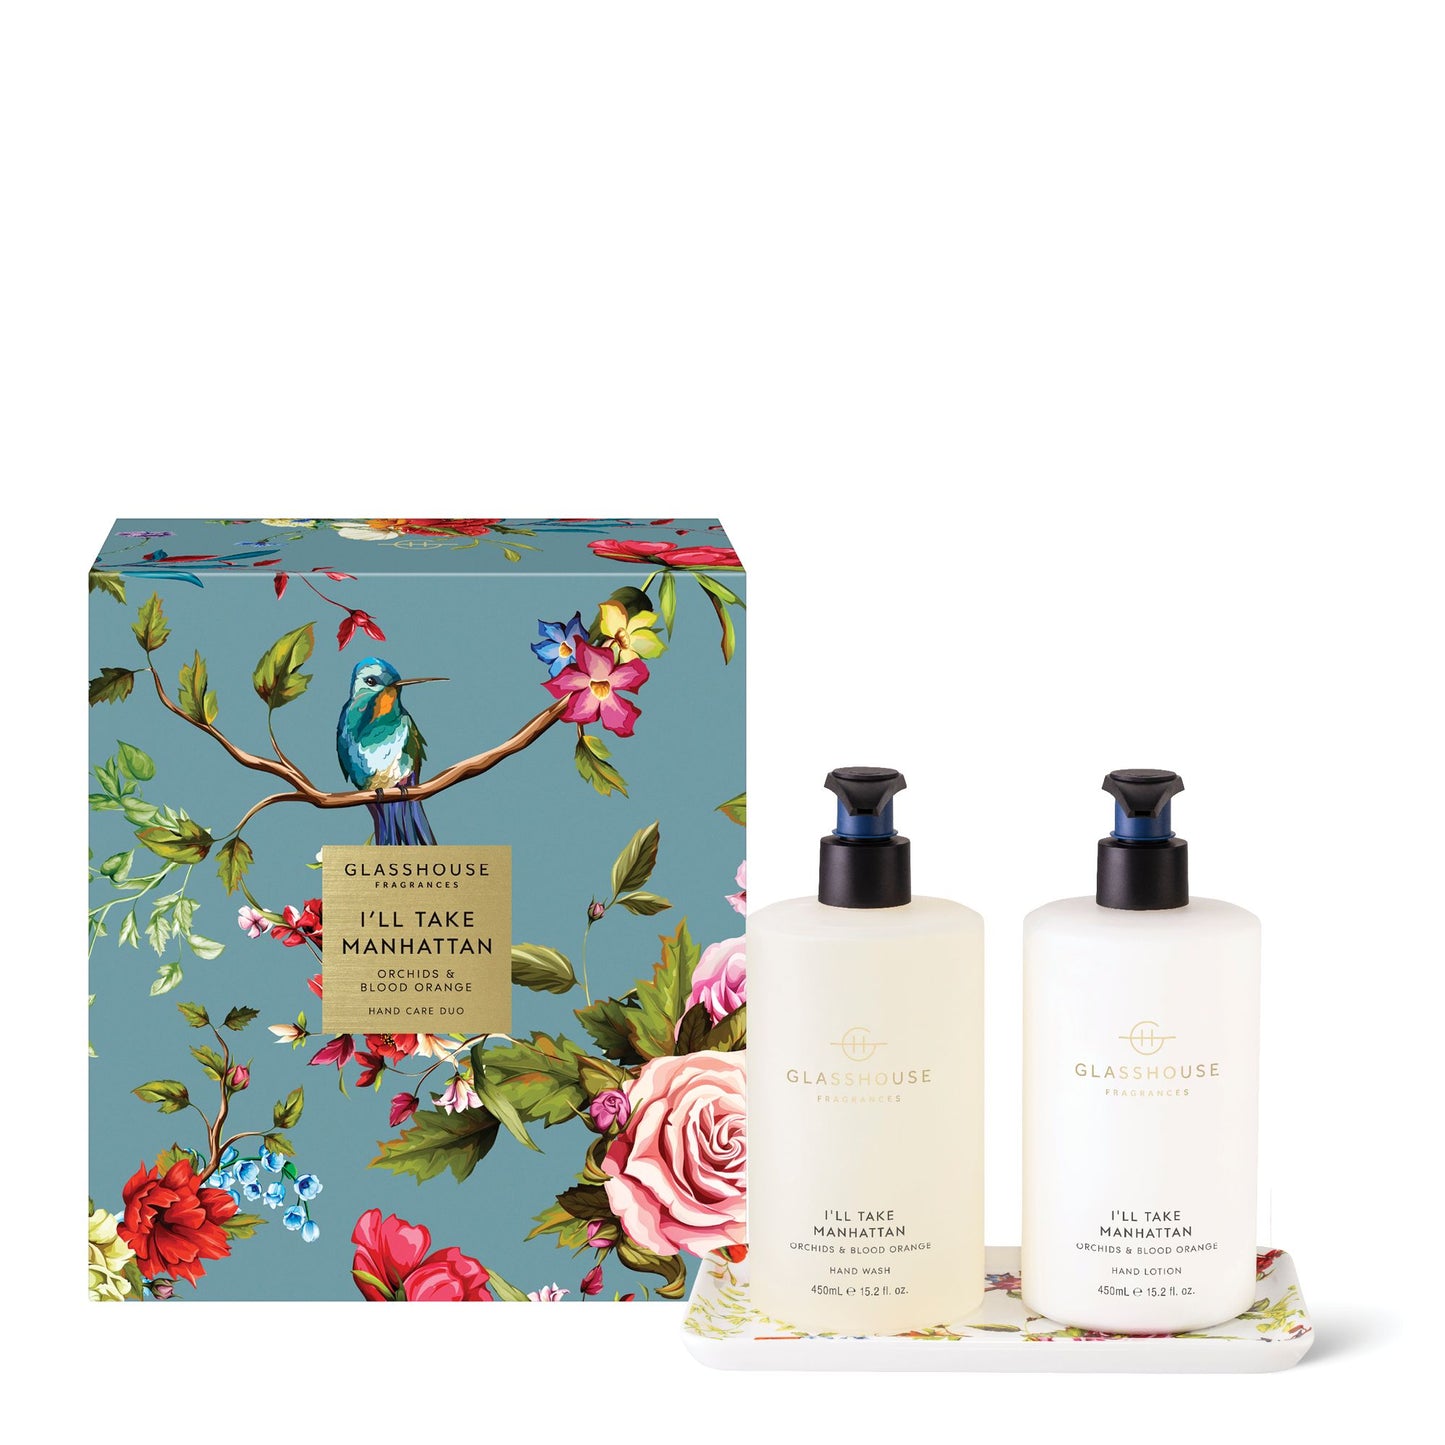 Glasshouse Hand Care Duo Gift Set - Mother's Day I'll Take Manhattan